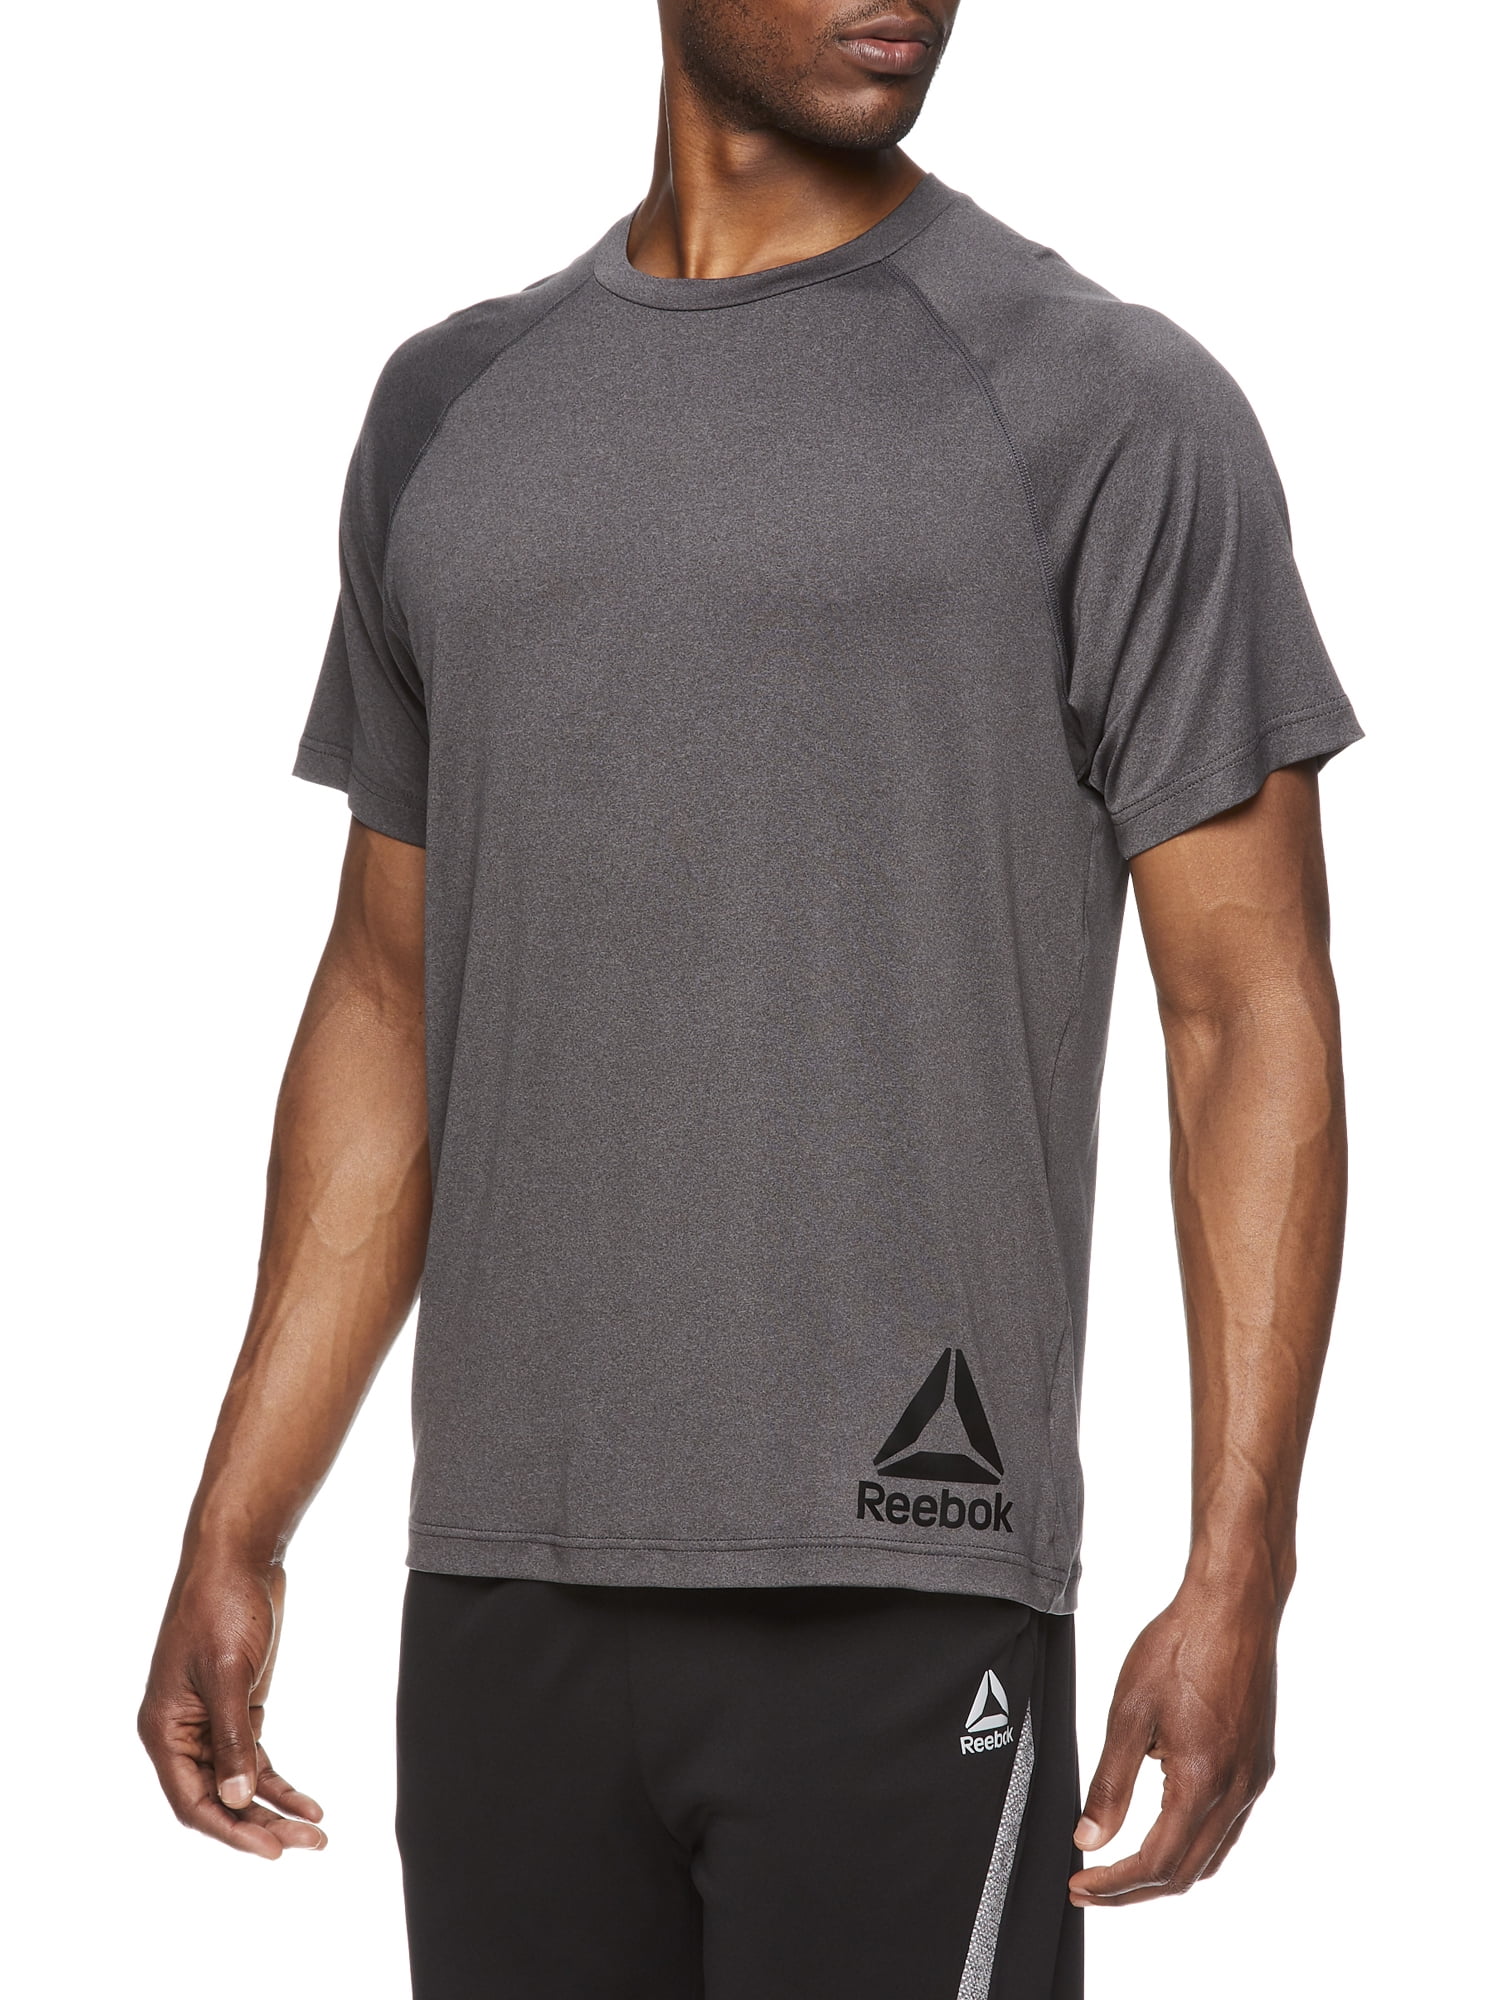 Reebok Men's Duration Quick Dry Short Sleeve Athletic T-Shirt, Up 